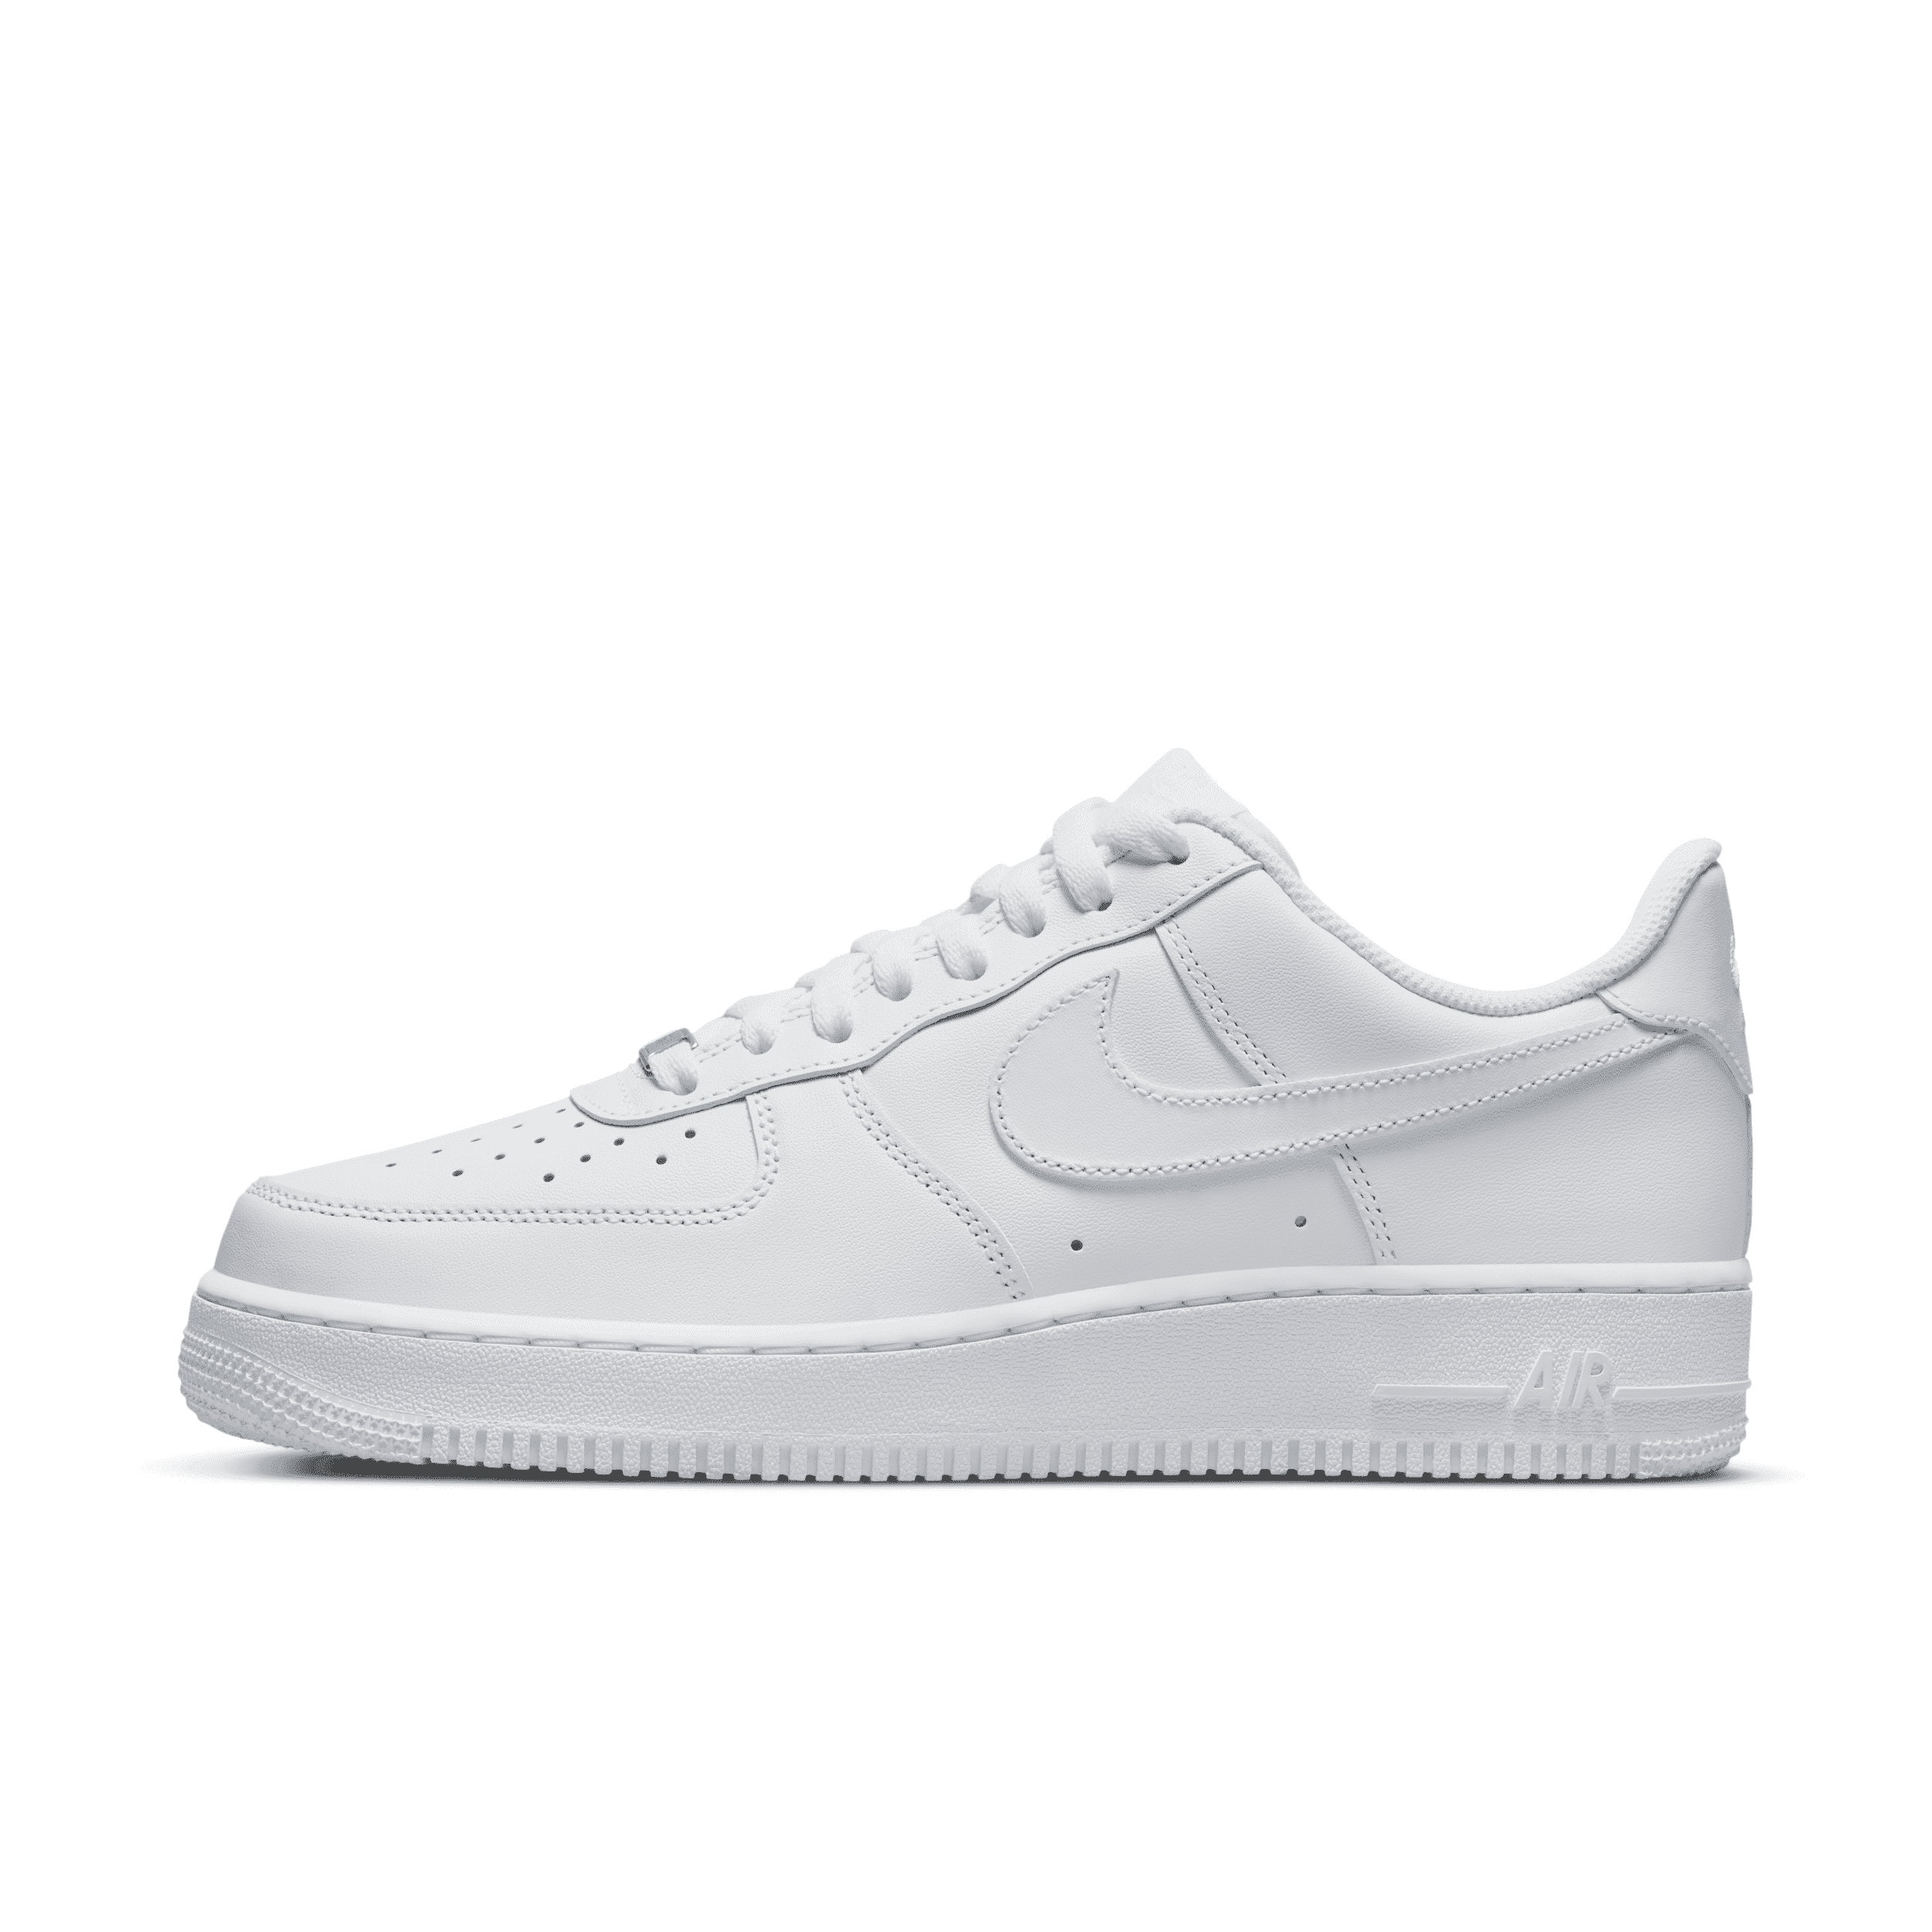 Nike Men's Air Force 1 '07 Shoes in White, Size: 6.5 | CW2288-111